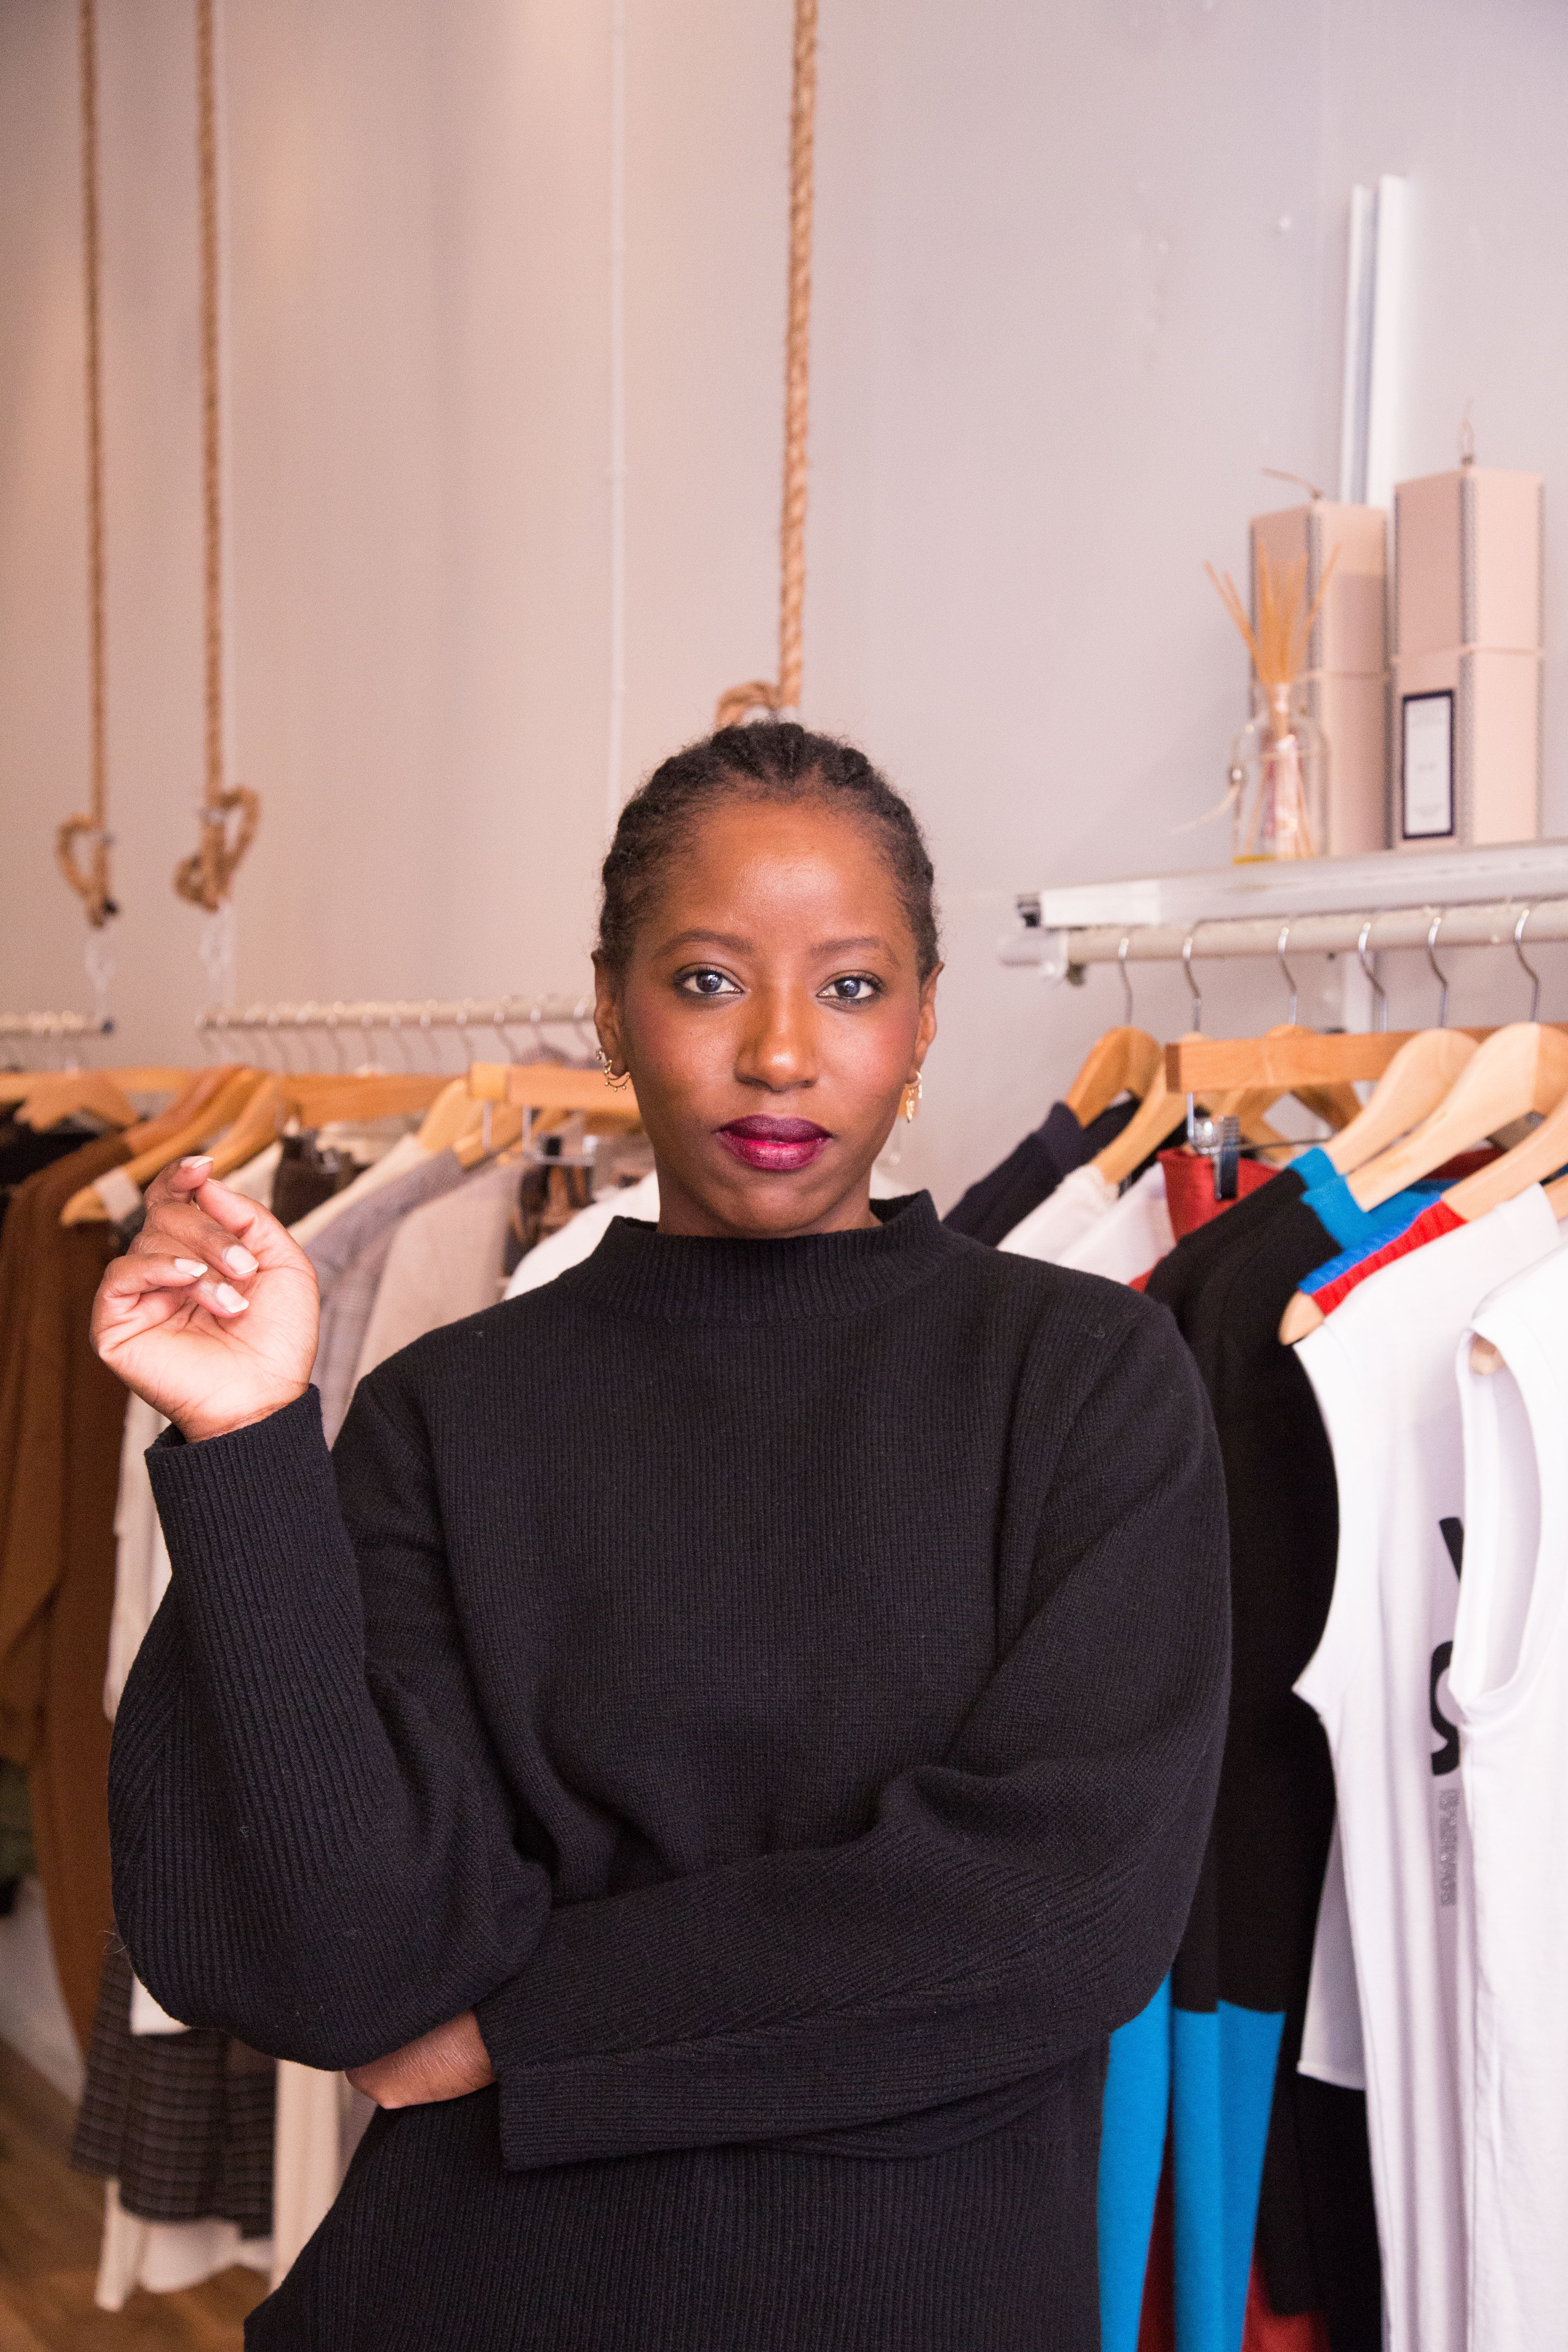 Boutique Boss: This Designer Worked for The Biggest Fashion Houses Before Opening Her Own Chic Store
